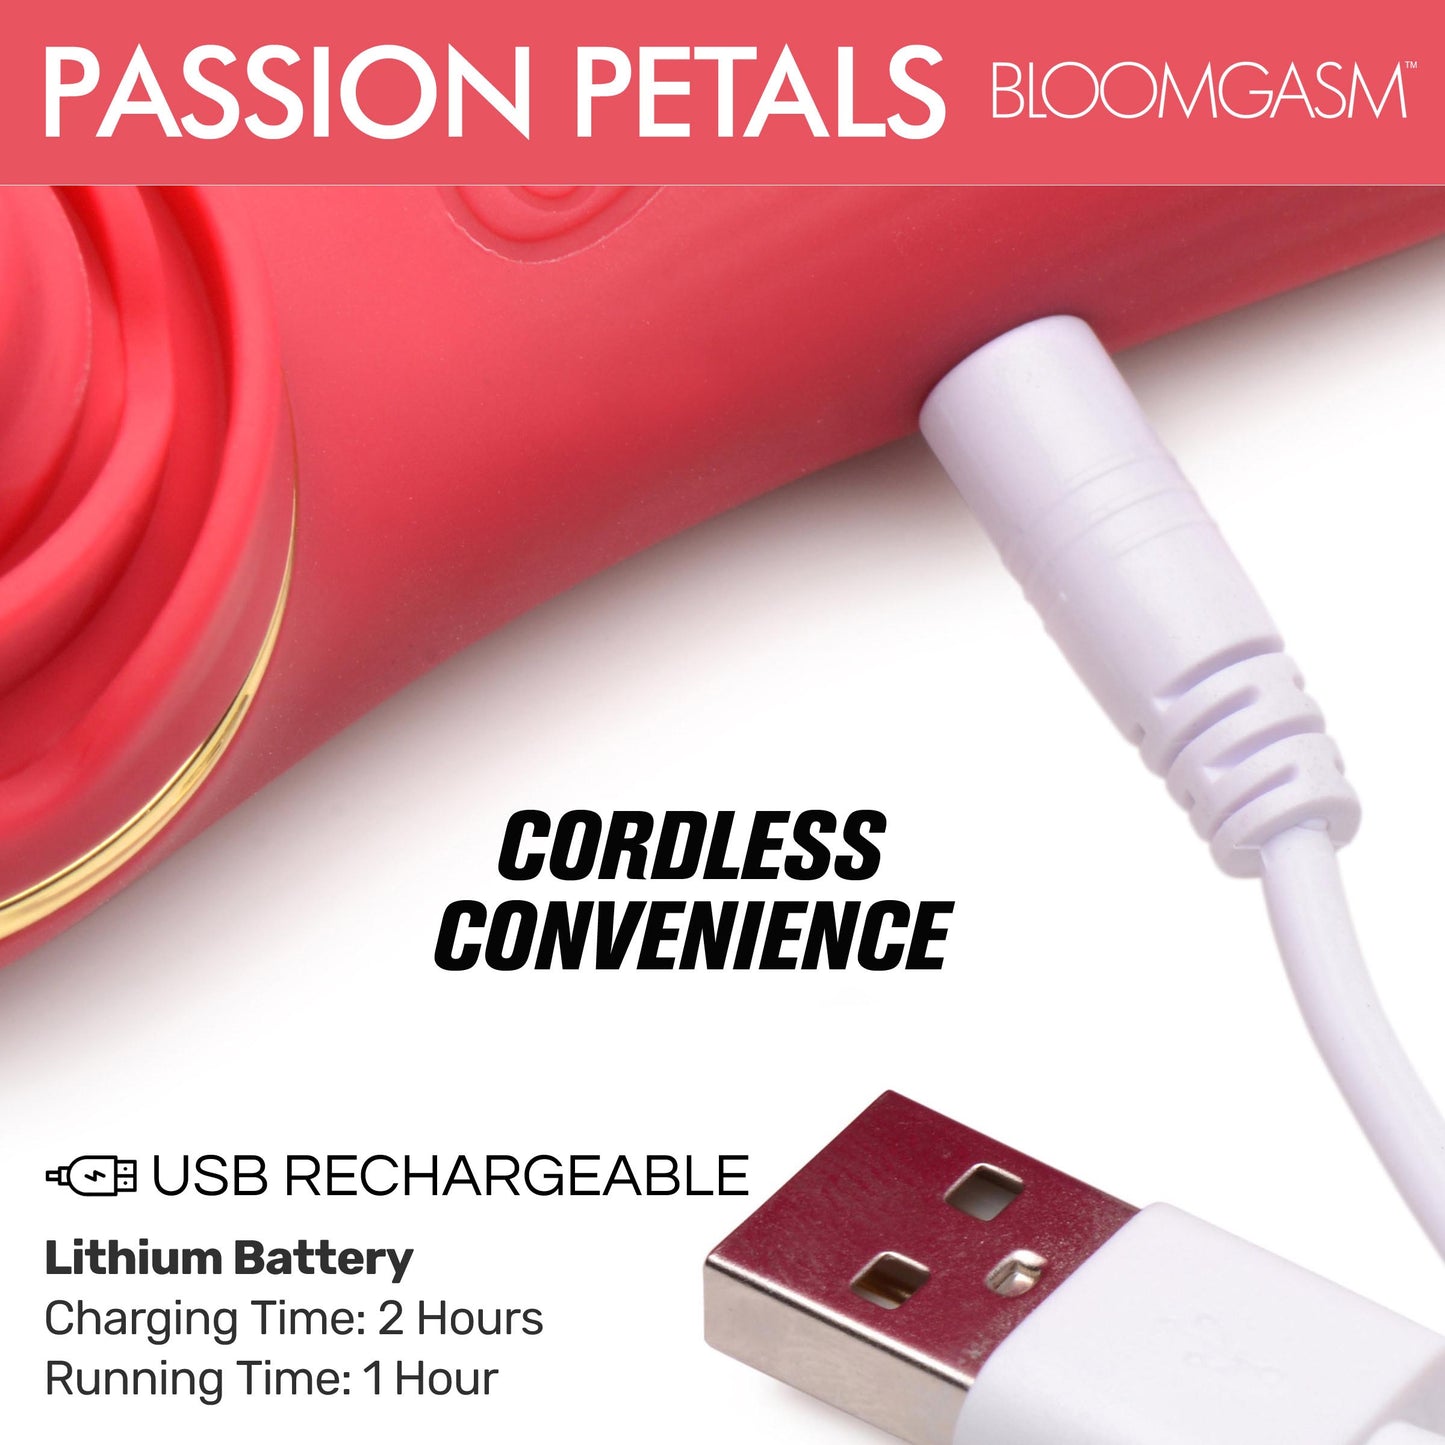 Passion Petals 10x Silicone Suction Rose Vibrator - Red